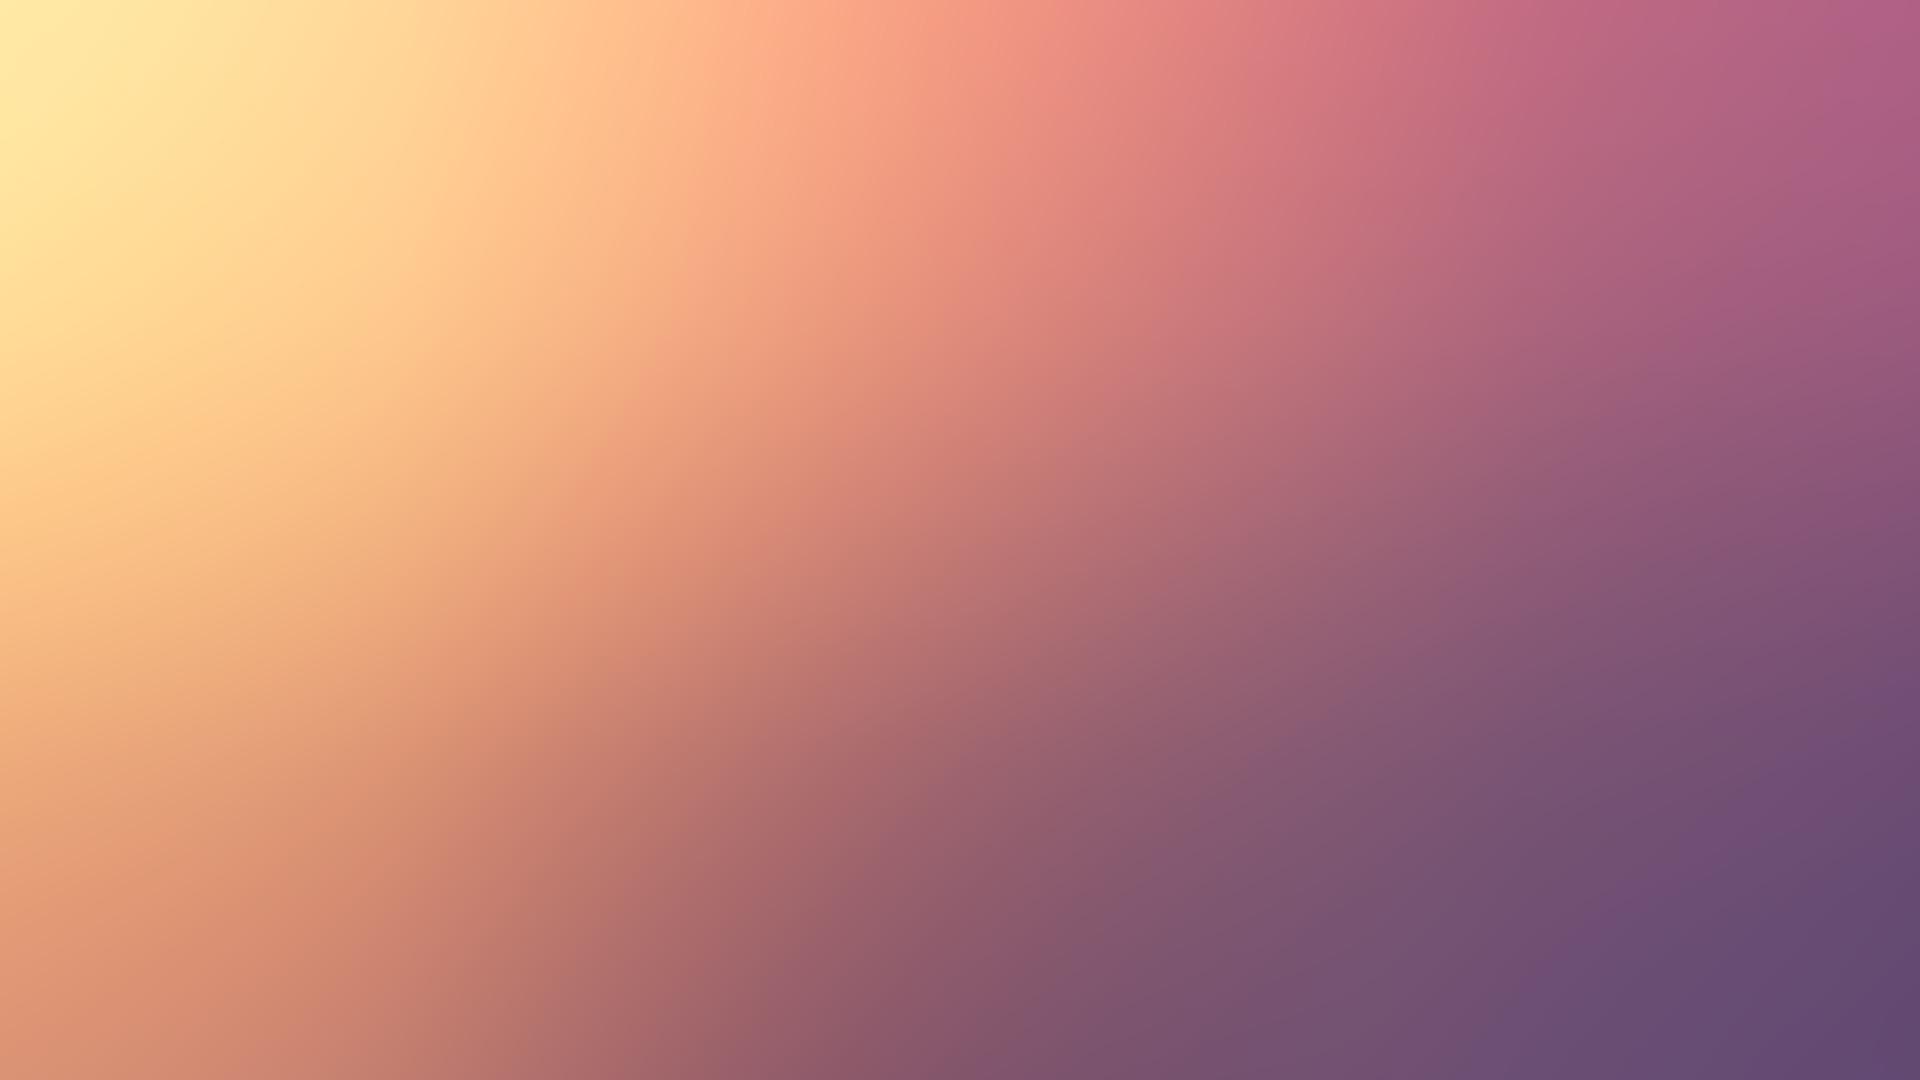 Blue and Pink Hair Color Fade Backgrounds - wide 1